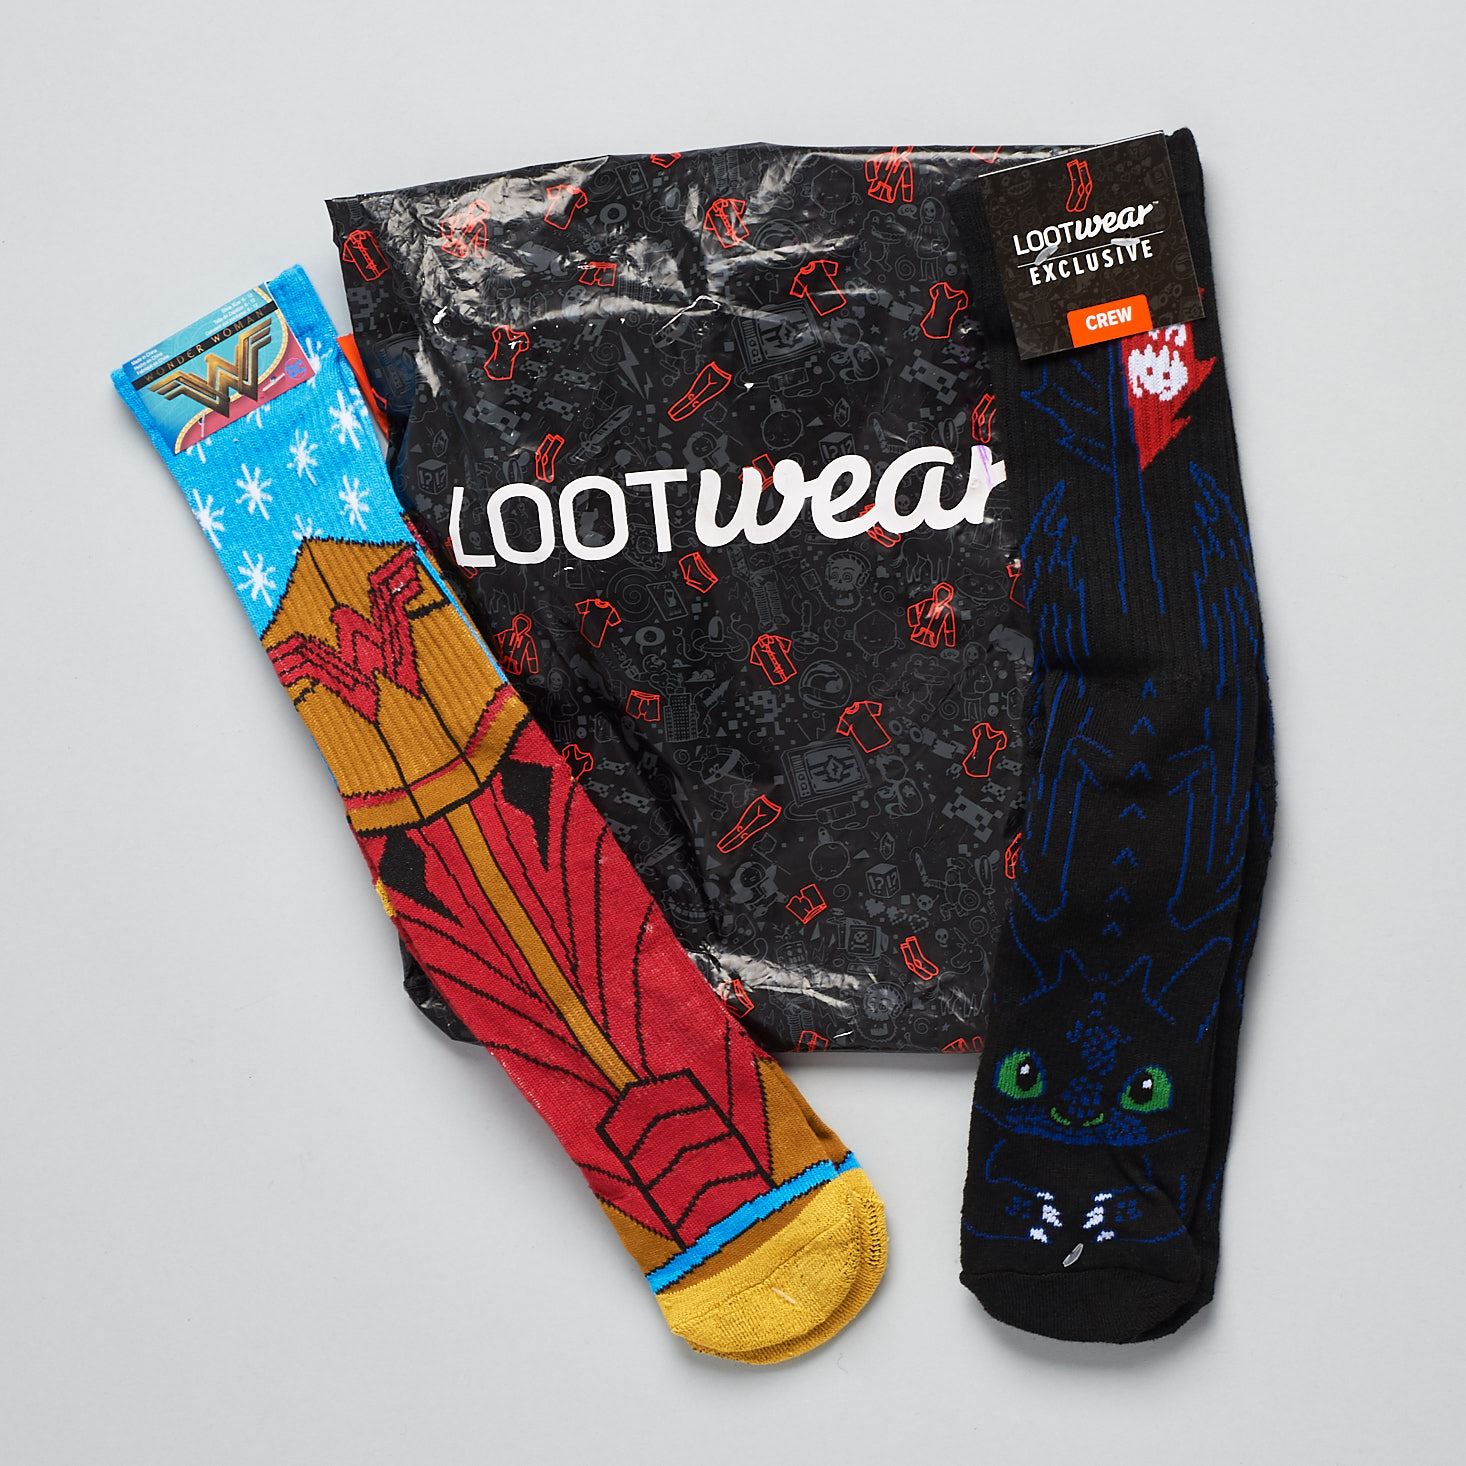 Loot Socks Subscription by Loot Crate Review + Coupon – February 2018